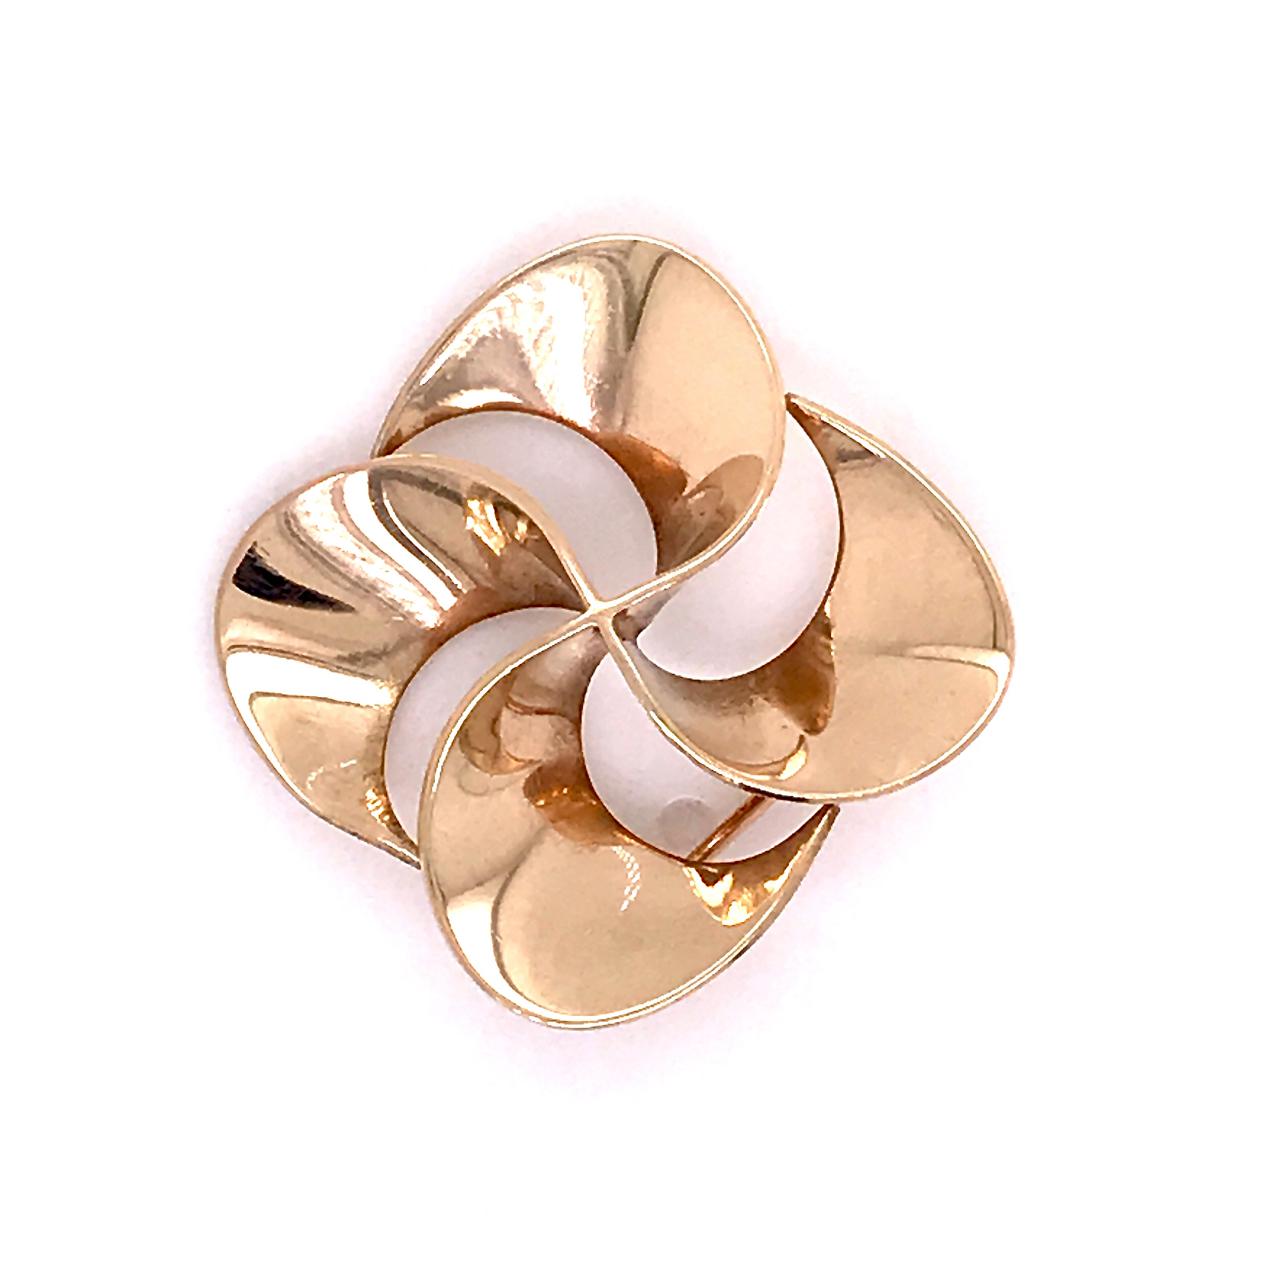 A wonderful 14K Tiffany & Co. brooch.

In the form of a pinwheel.

Marked to the reverse: 14k for gold fineness and Tiffany & Co.

Simply elegant design from Tiffany!

Length: ca. 23 mm
Height: ca. 23 mm

Items purchased from this dealer must